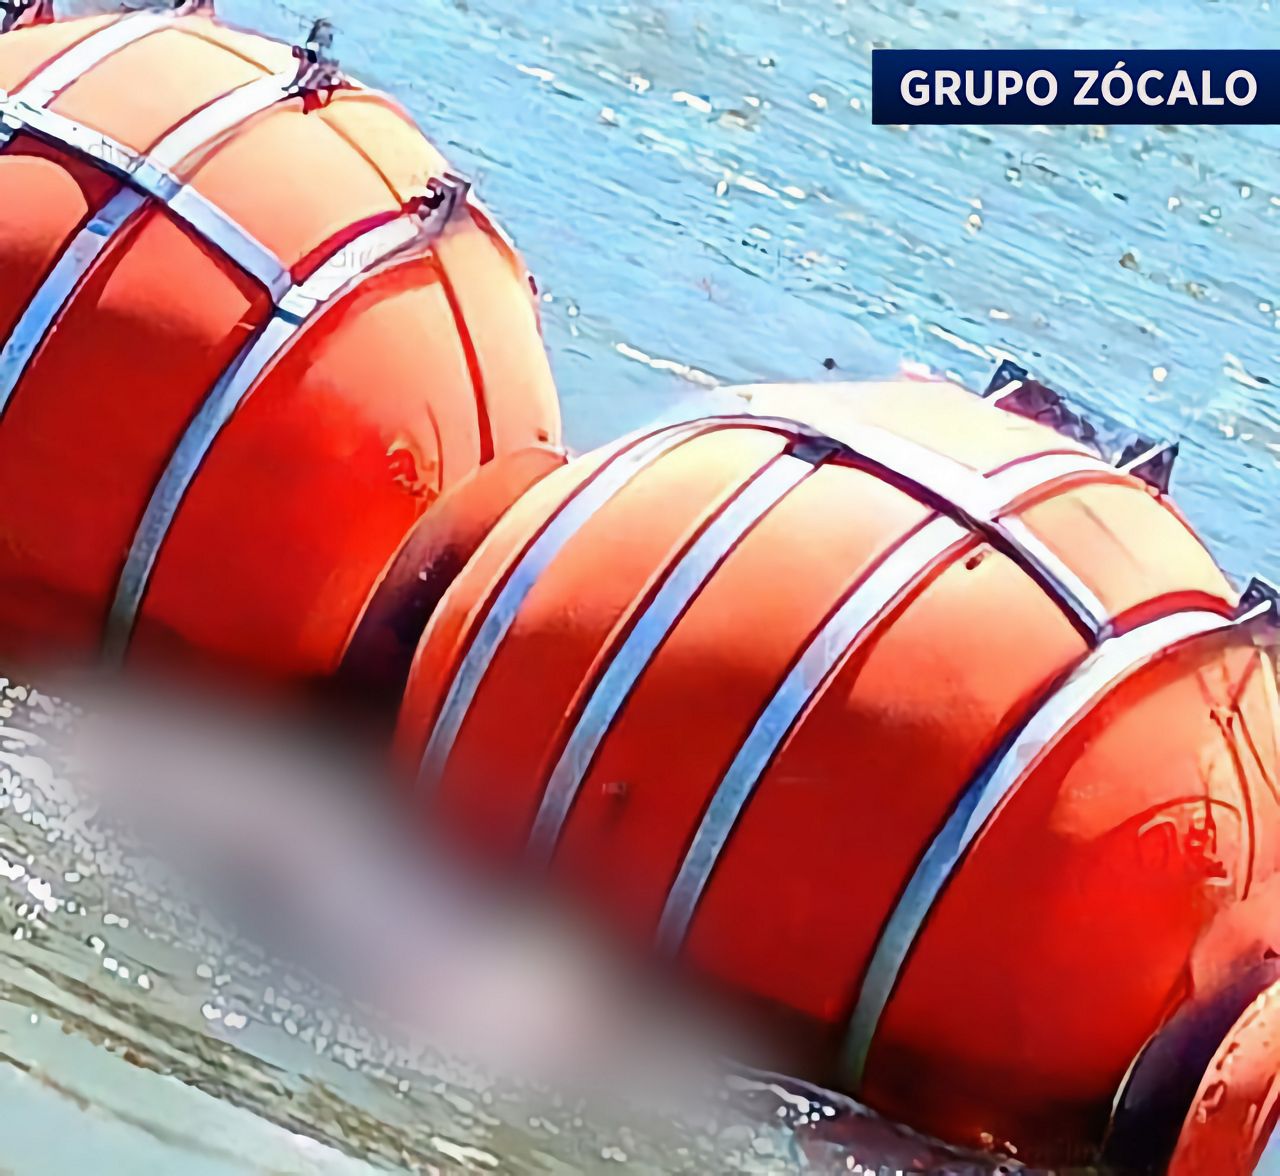 Edited photo of one of the bodies found in the Rio Grande. Spectrum News cannot independently confirm the authenticity of the photo or whether the individual seen in the photo drowned because of the buoys.